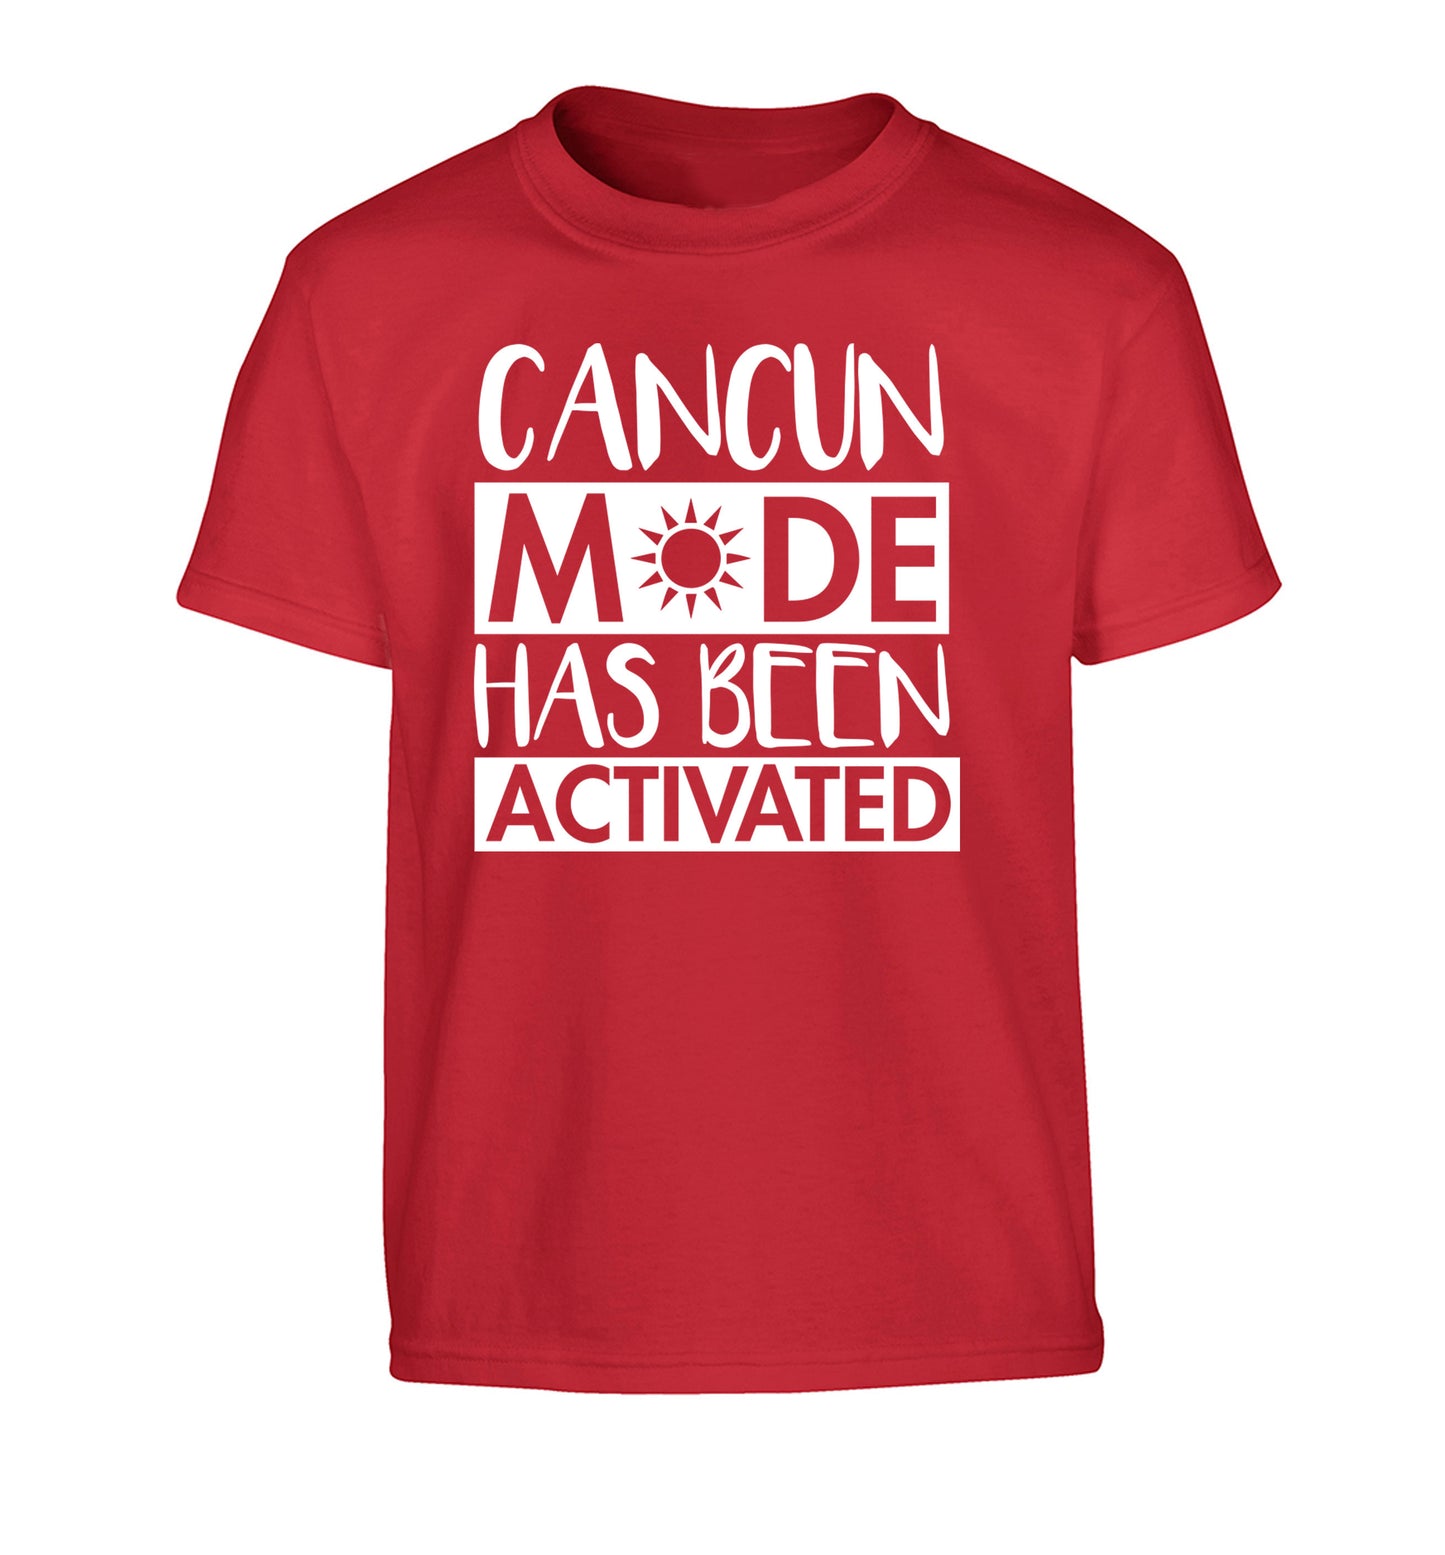 Cancun mode has been activated Children's red Tshirt 12-14 Years